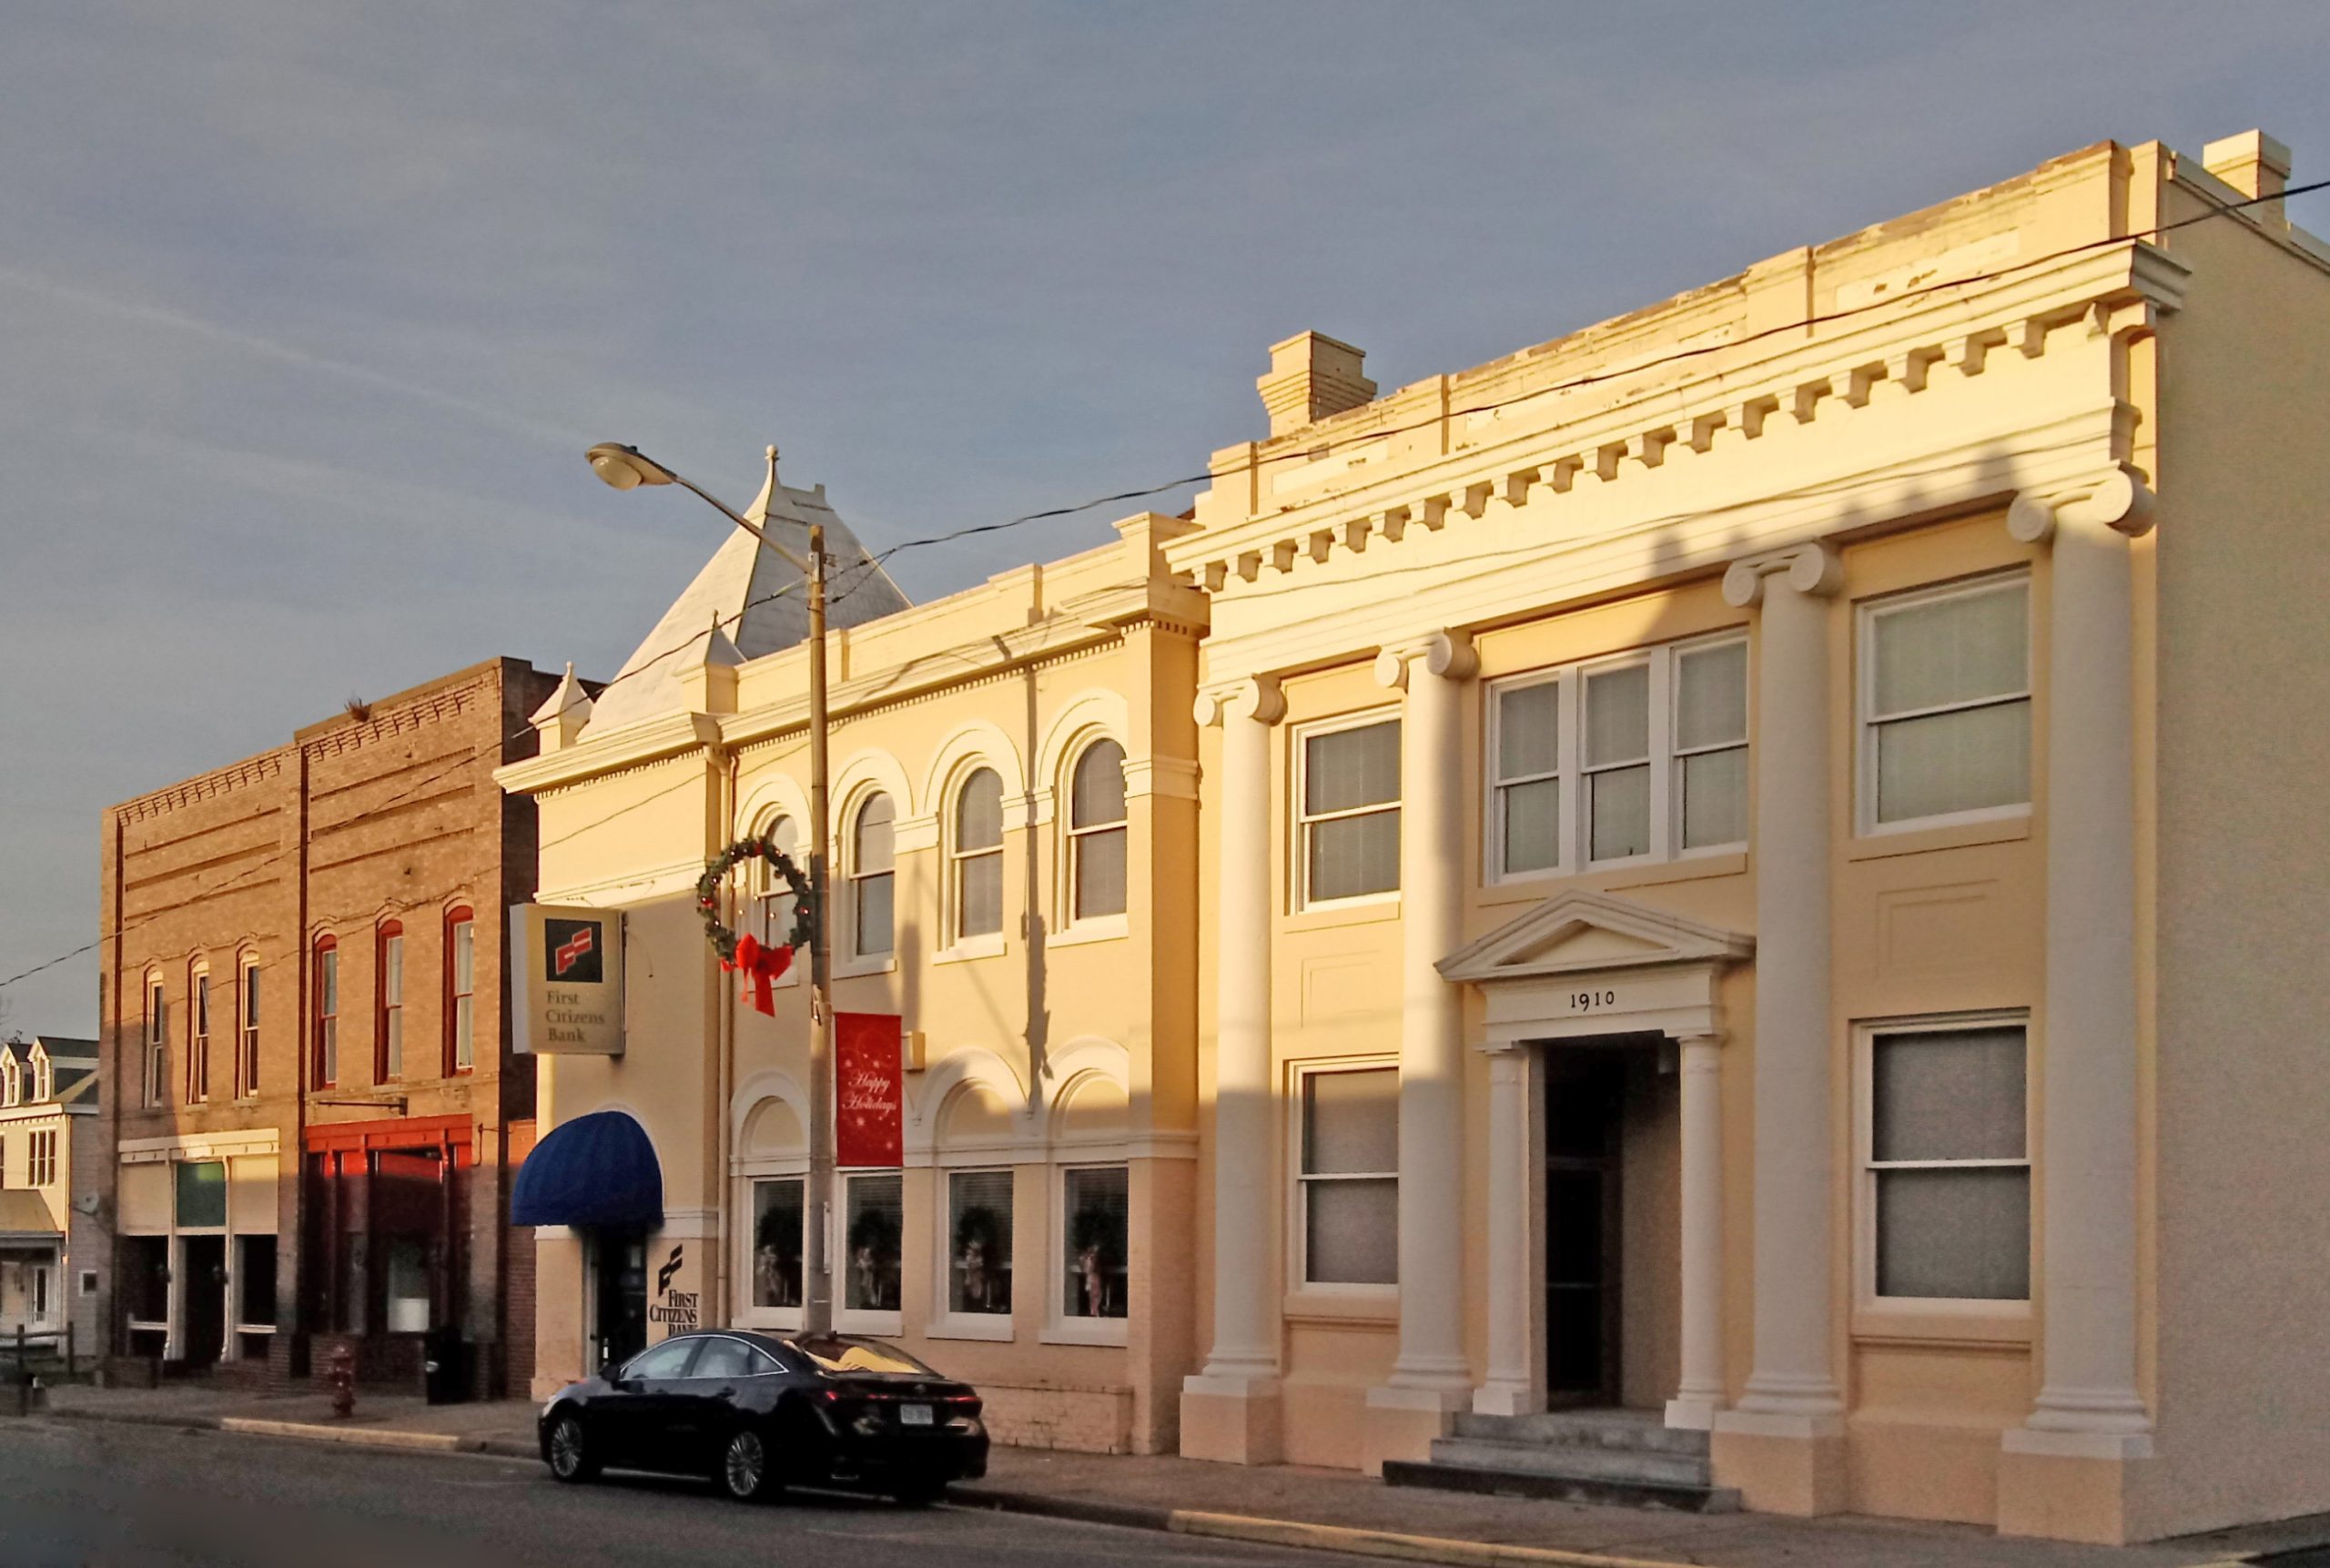 Crewe Commercial Historic District